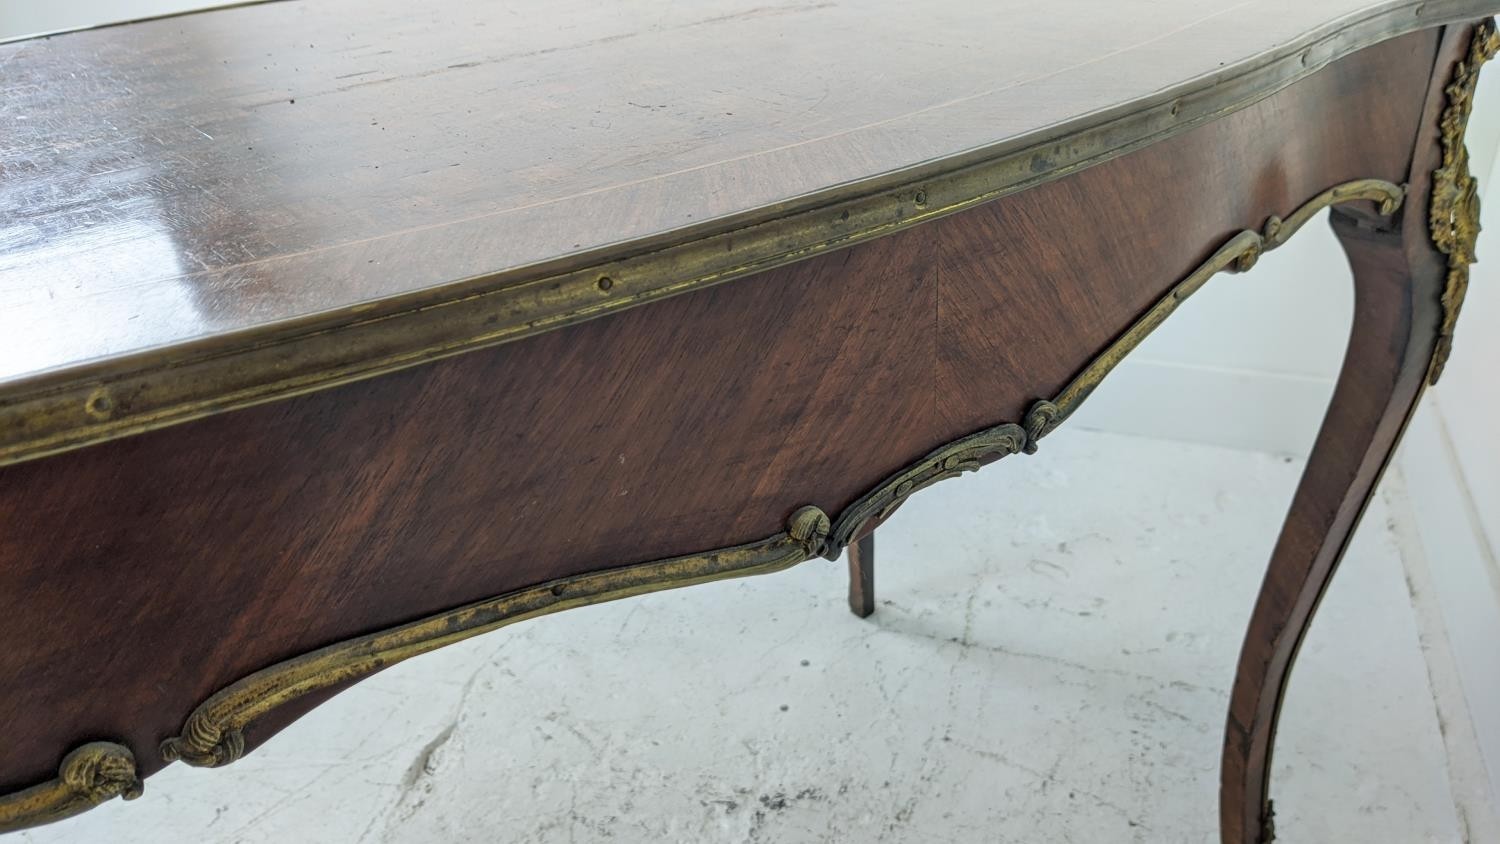 BUREAU PLAT, circa 1880, Louis XV style, French parquetry with ormolu mounts single long drawer - Image 21 of 22